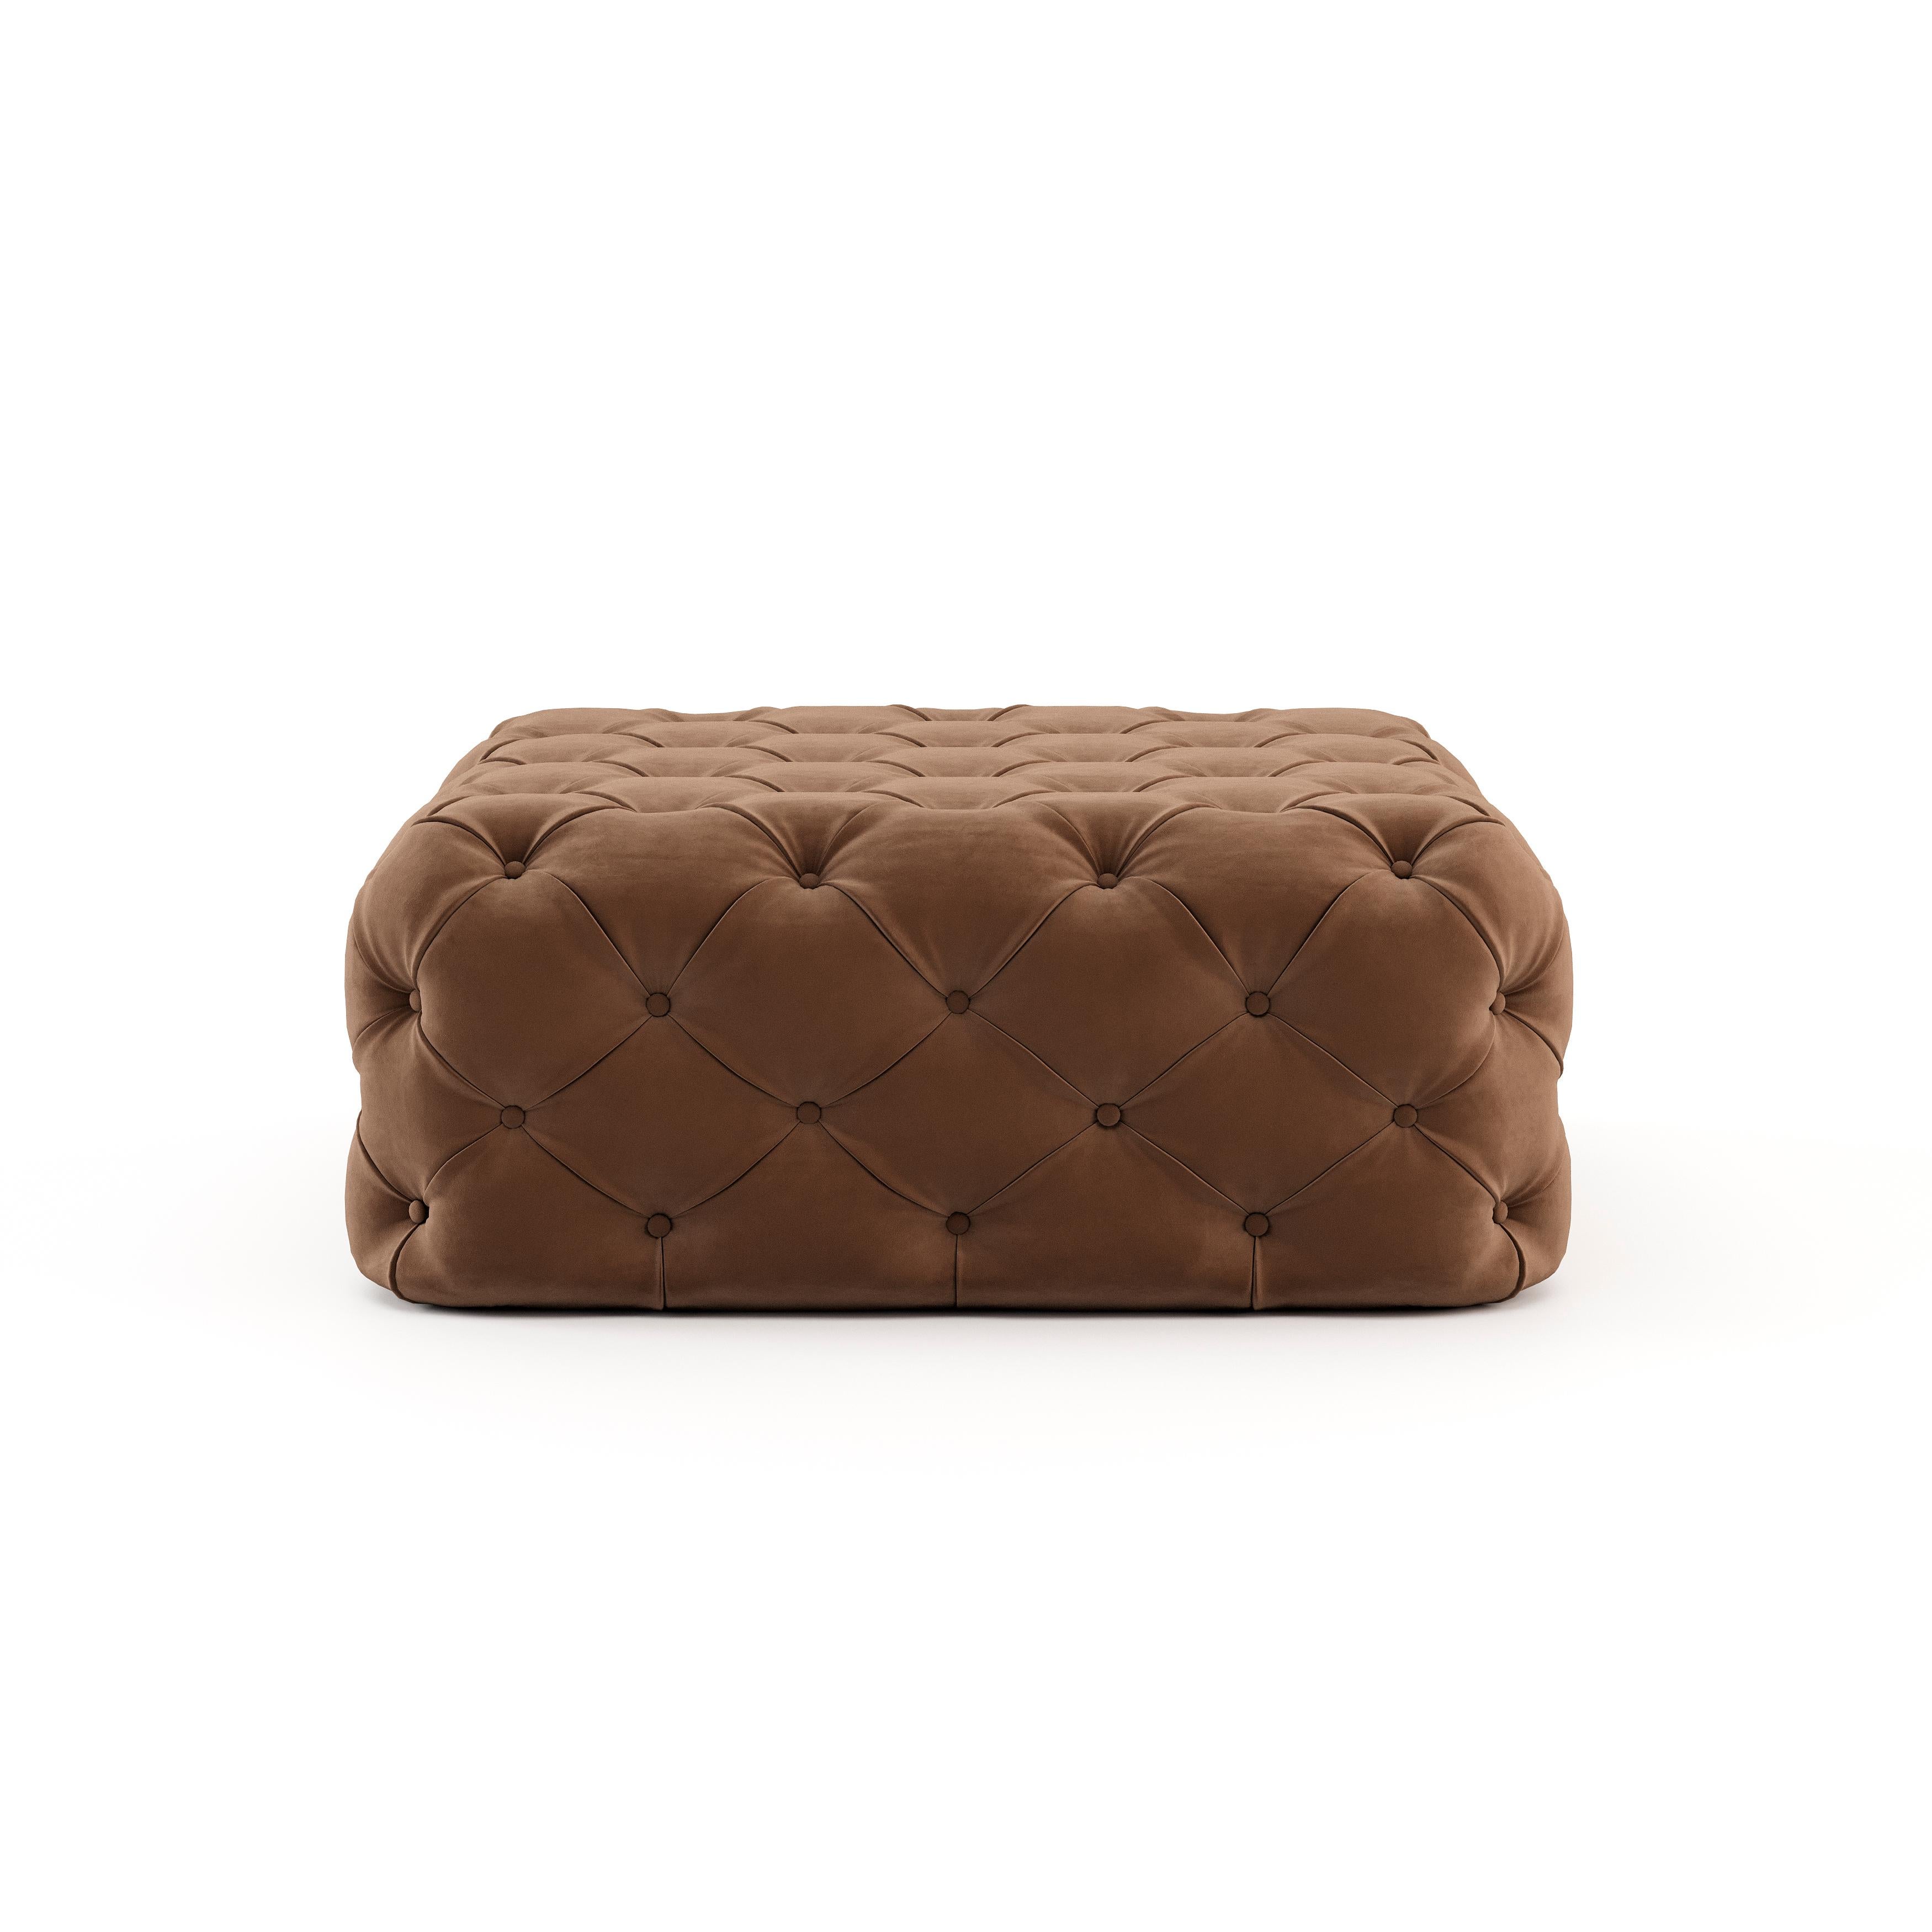 Gum pouf is a statement piece that can be placed in modern bedrooms, functional living rooms or comfortable home cinema areas. Simultaneously comfortable and luxurious, this rectangular ottoman is carefully handmade with the buttoned upholstery